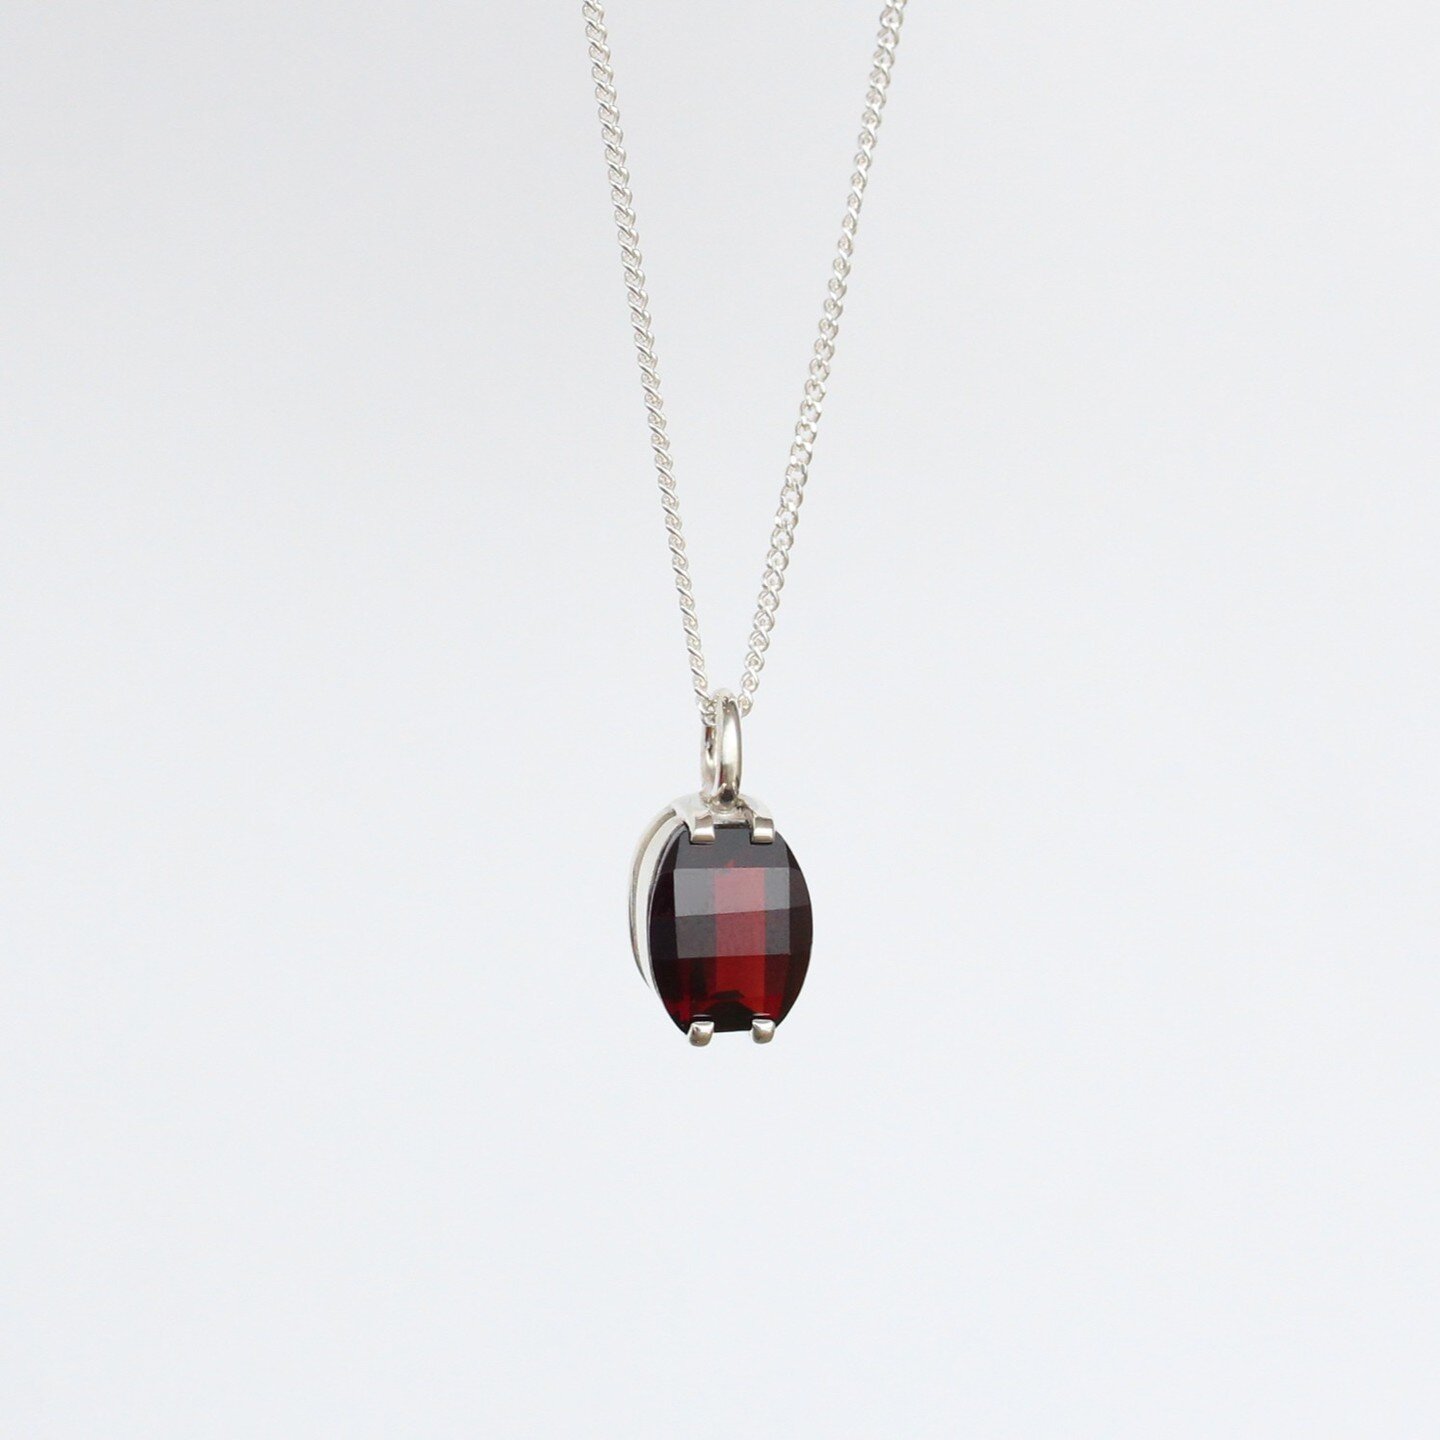 Stunning 4-claw cushion-shaped garnet pendant - handcrafted, custom-made and is as unique as is it alluring. 😍

Did you know garnets were once used as a talisman for protection by warriors going into battle and to ward off pestilence and plague? Tod